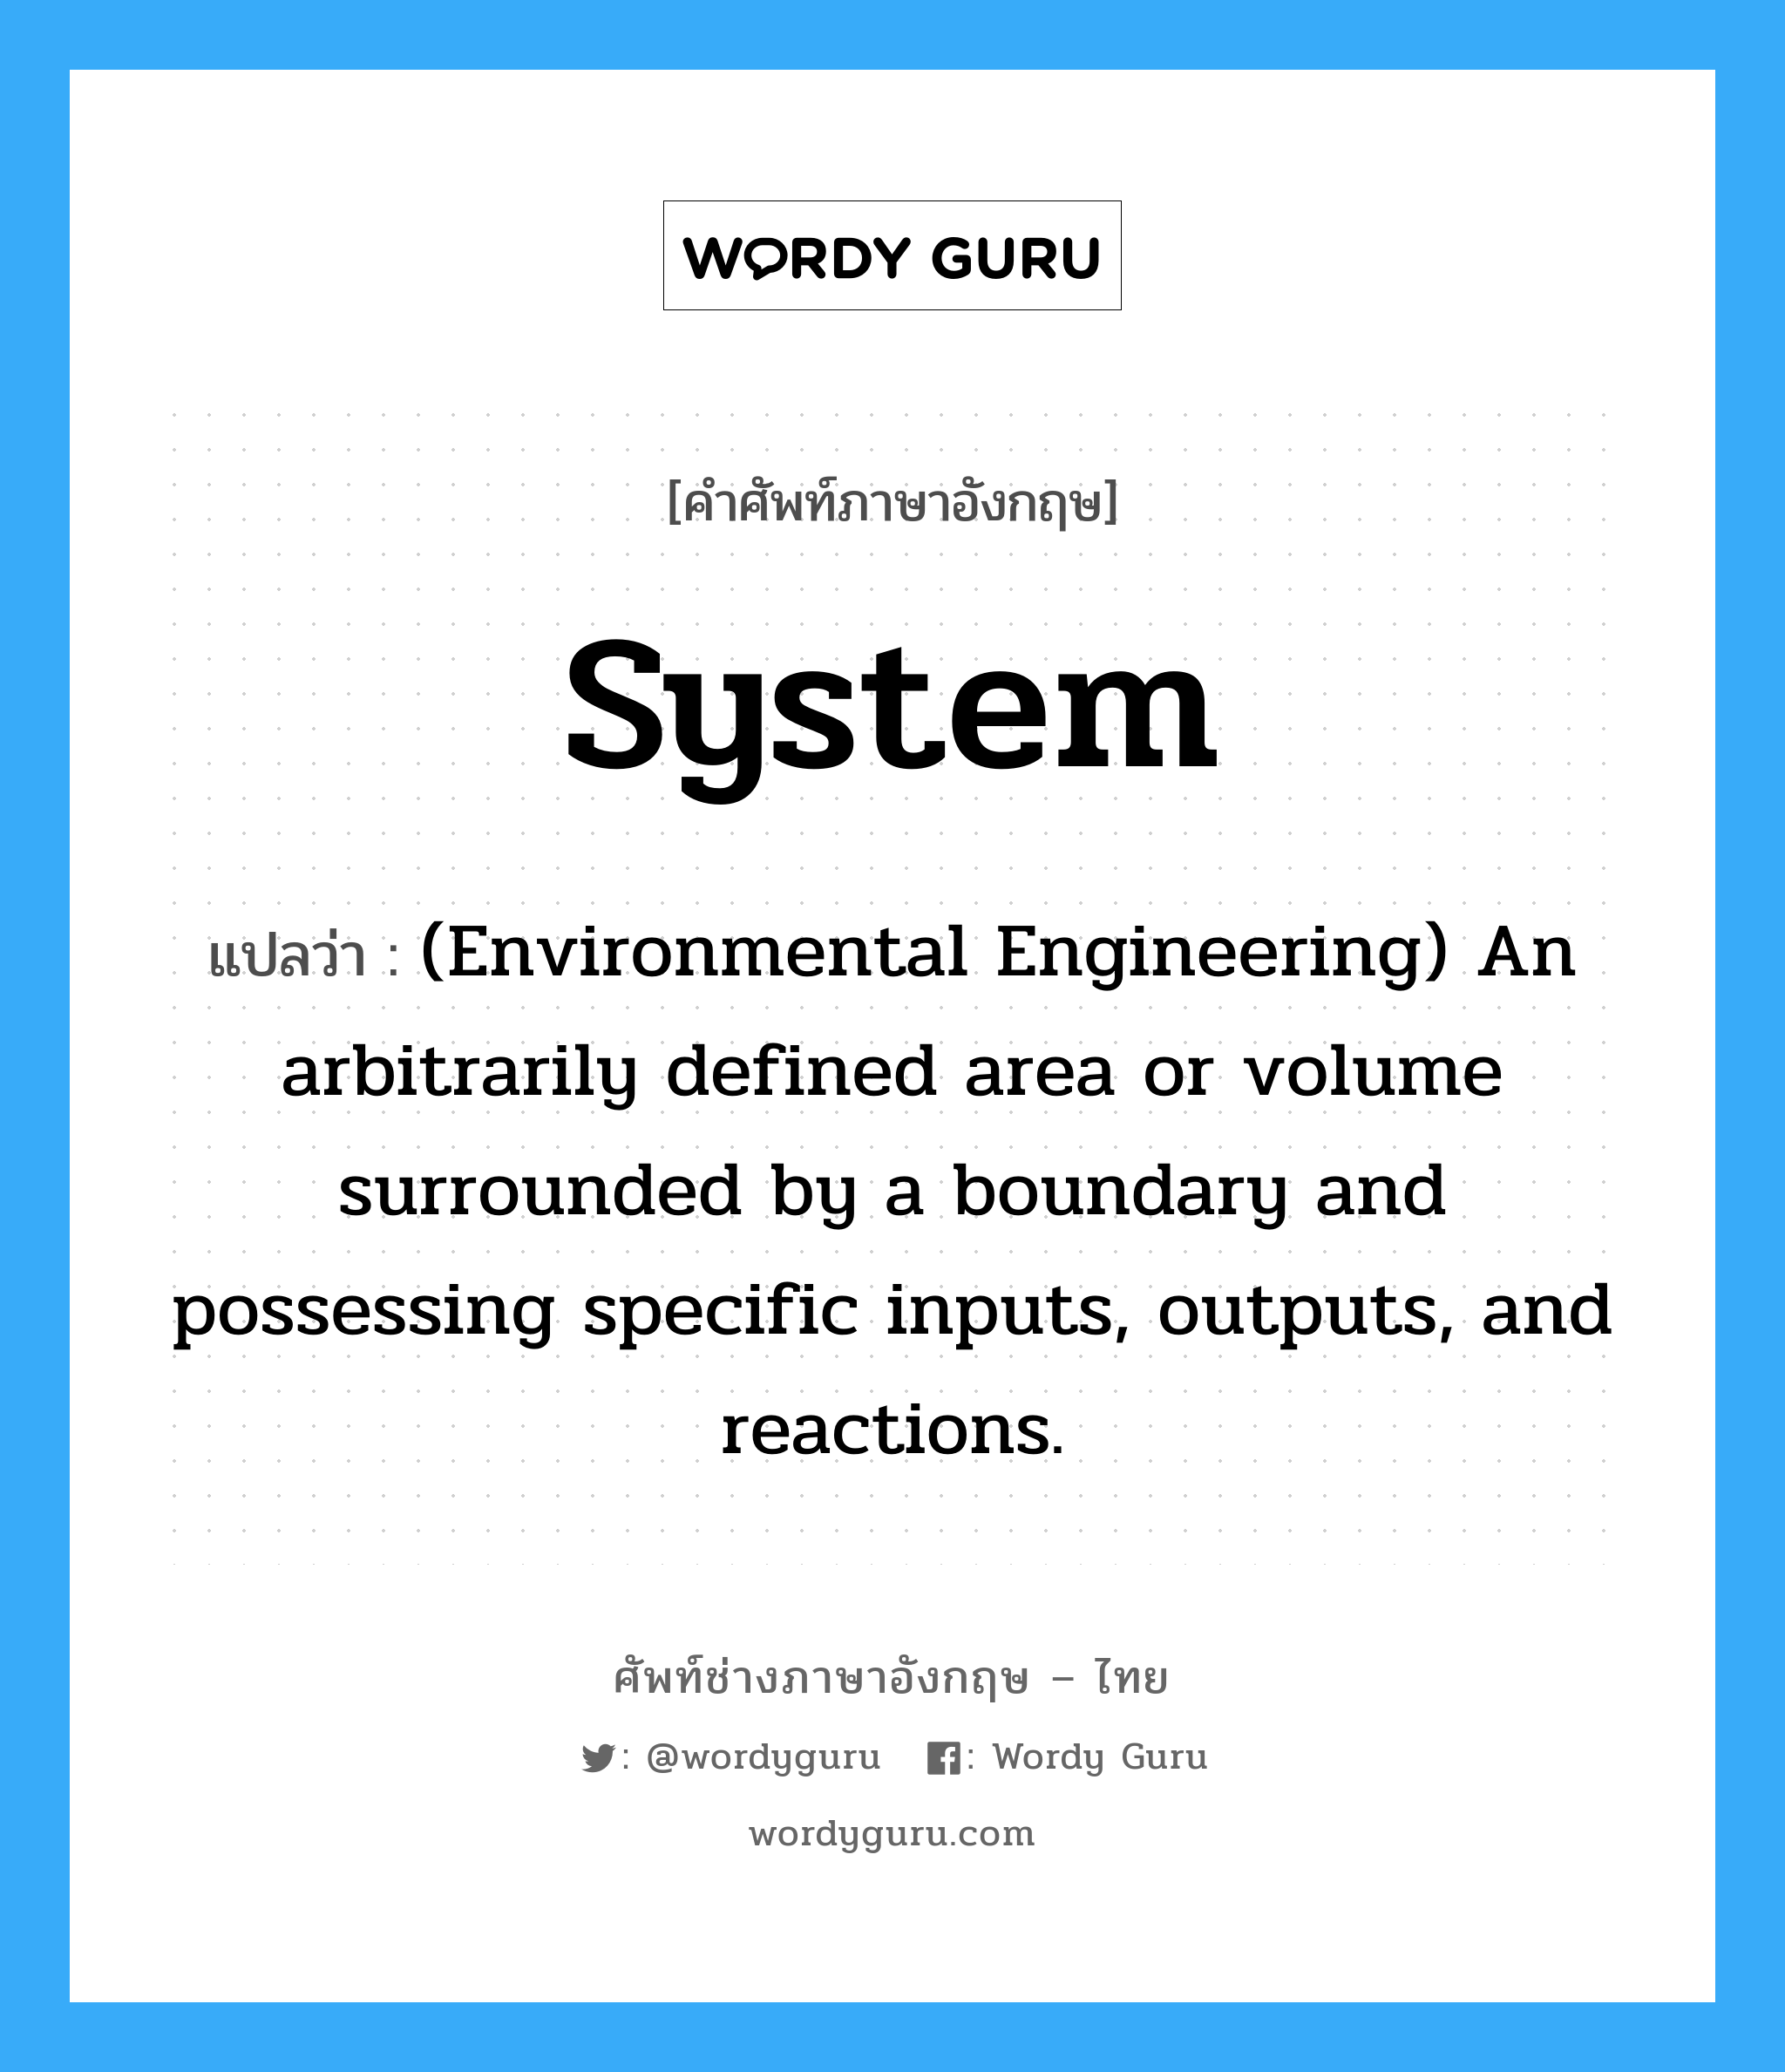 System แปลว่า?, คำศัพท์ช่างภาษาอังกฤษ - ไทย System คำศัพท์ภาษาอังกฤษ System แปลว่า (Environmental Engineering) An arbitrarily defined area or volume surrounded by a boundary and possessing specific inputs, outputs, and reactions.